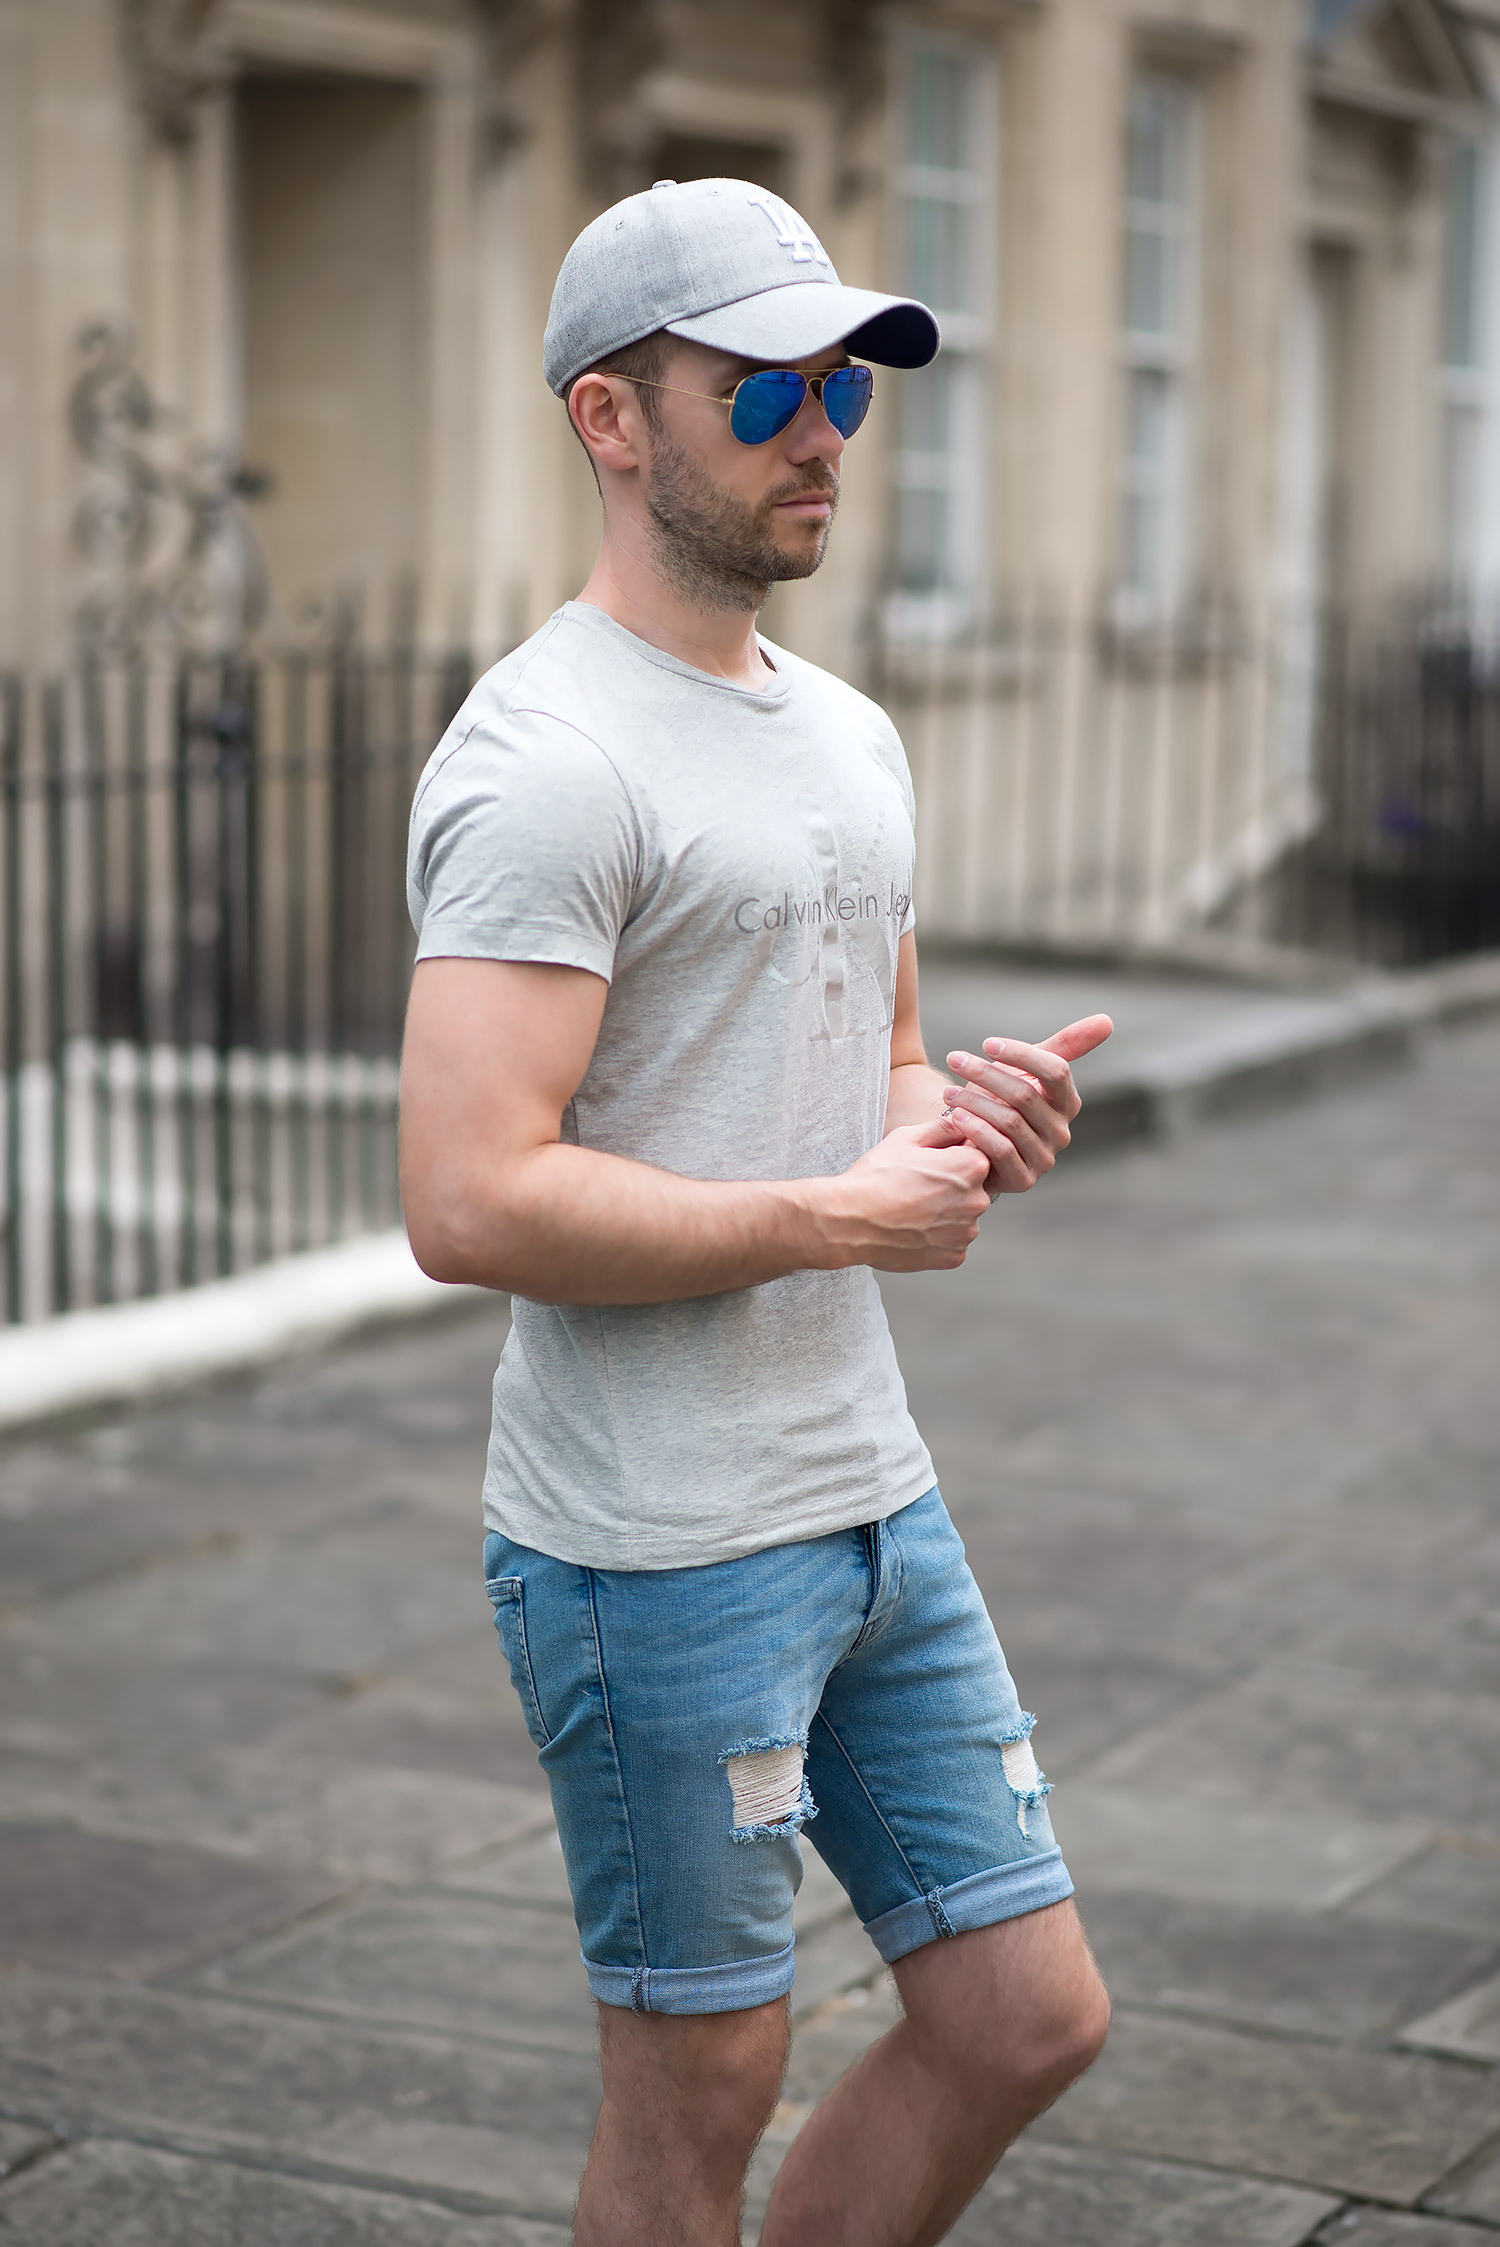 Calvin Klein T Shirt And Topman Skinny Denim Shorts Outfit | Your ...